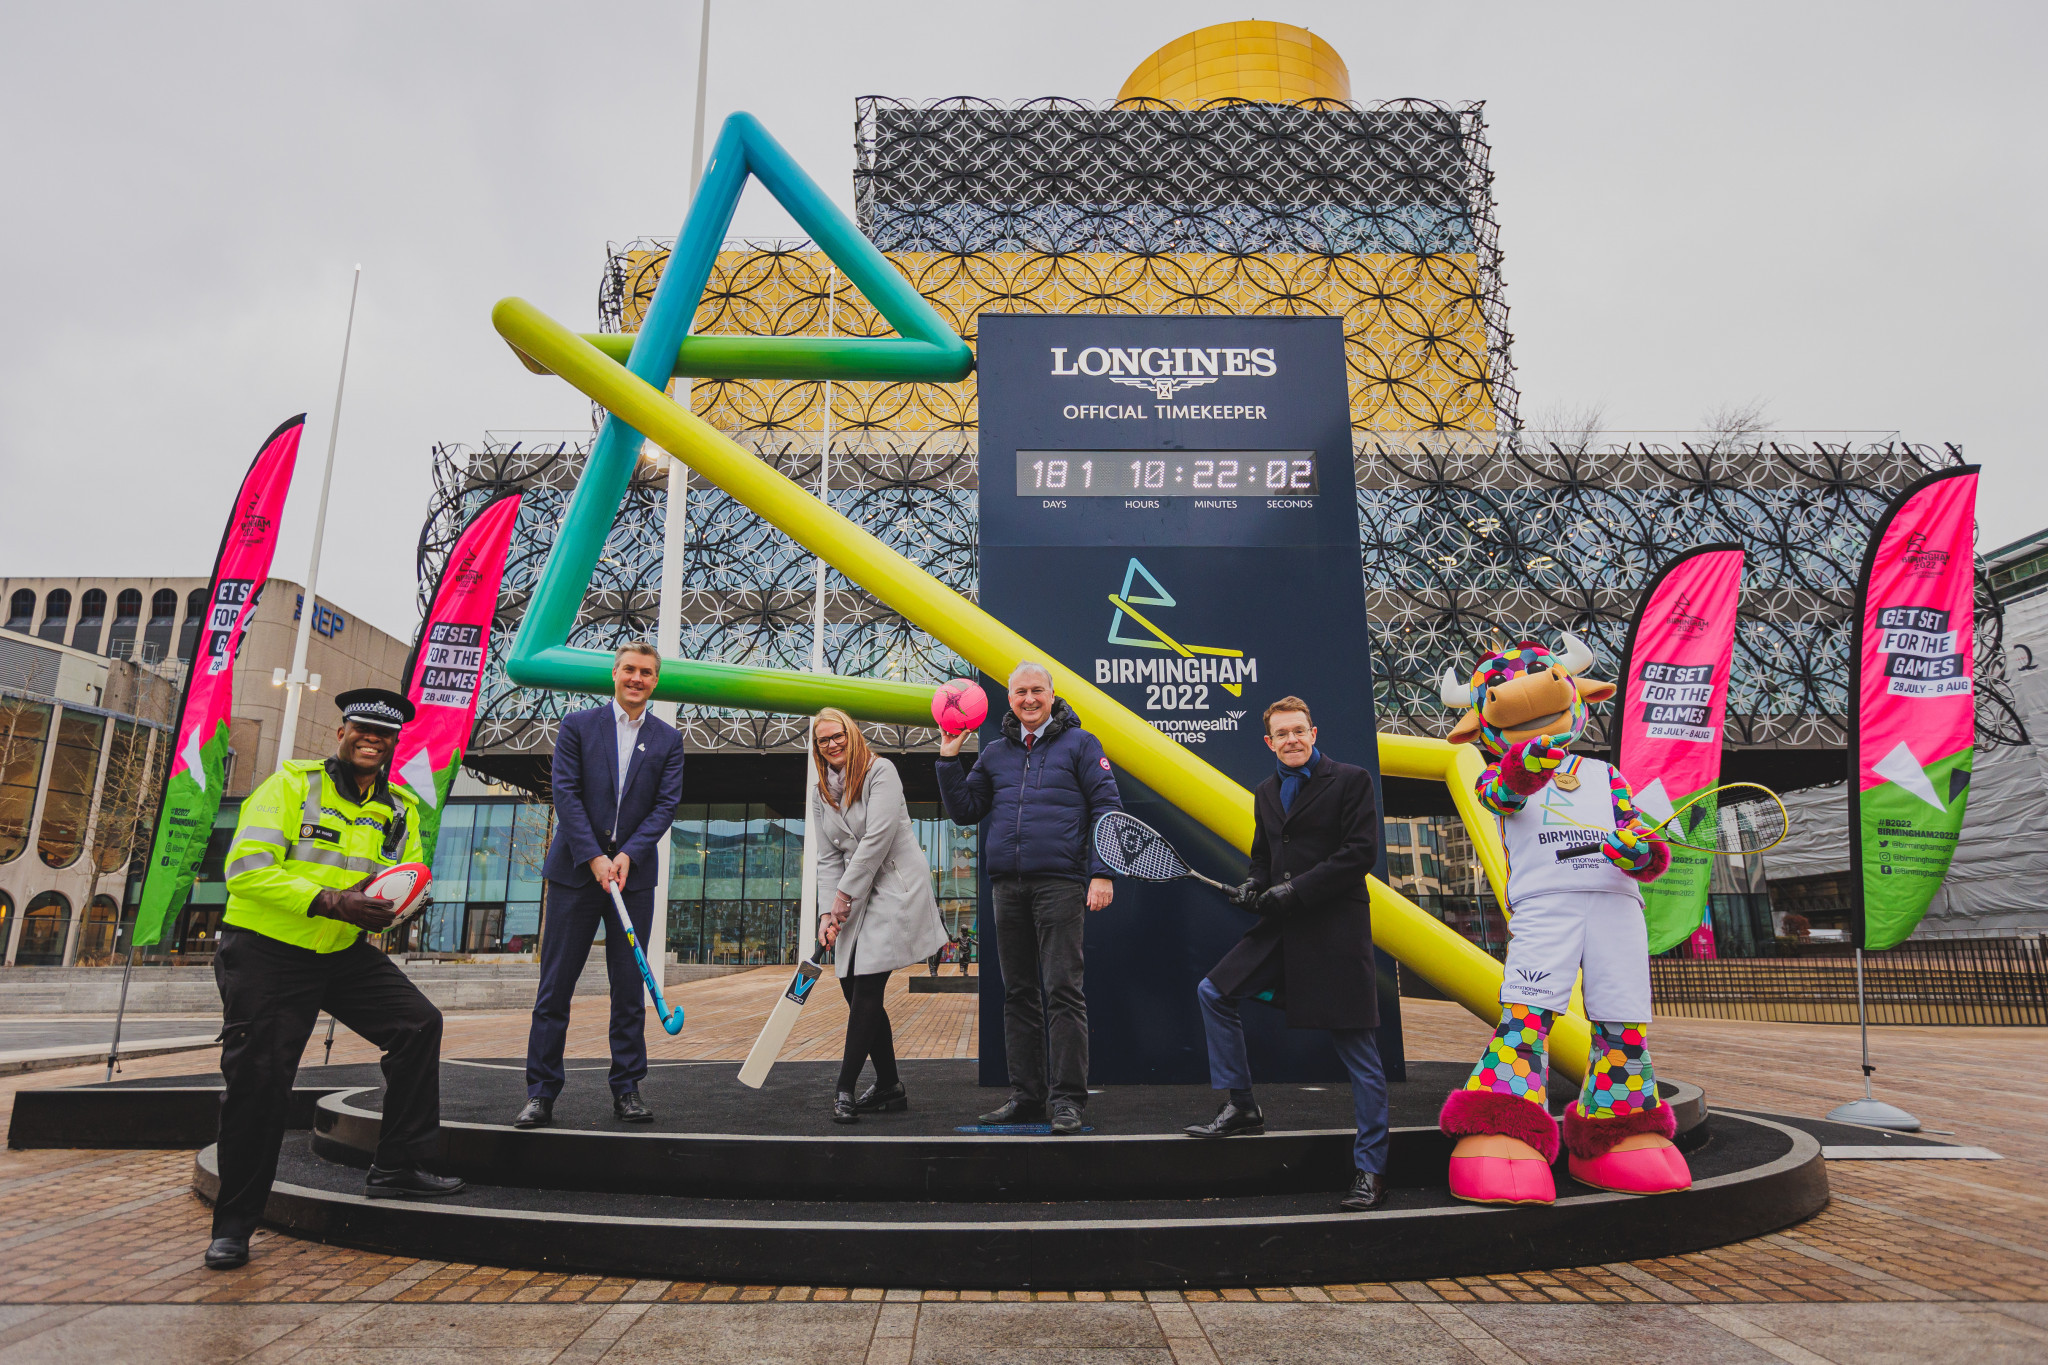 Birmingham 2022 launches initiative aimed at helping area to prepare with six months to go